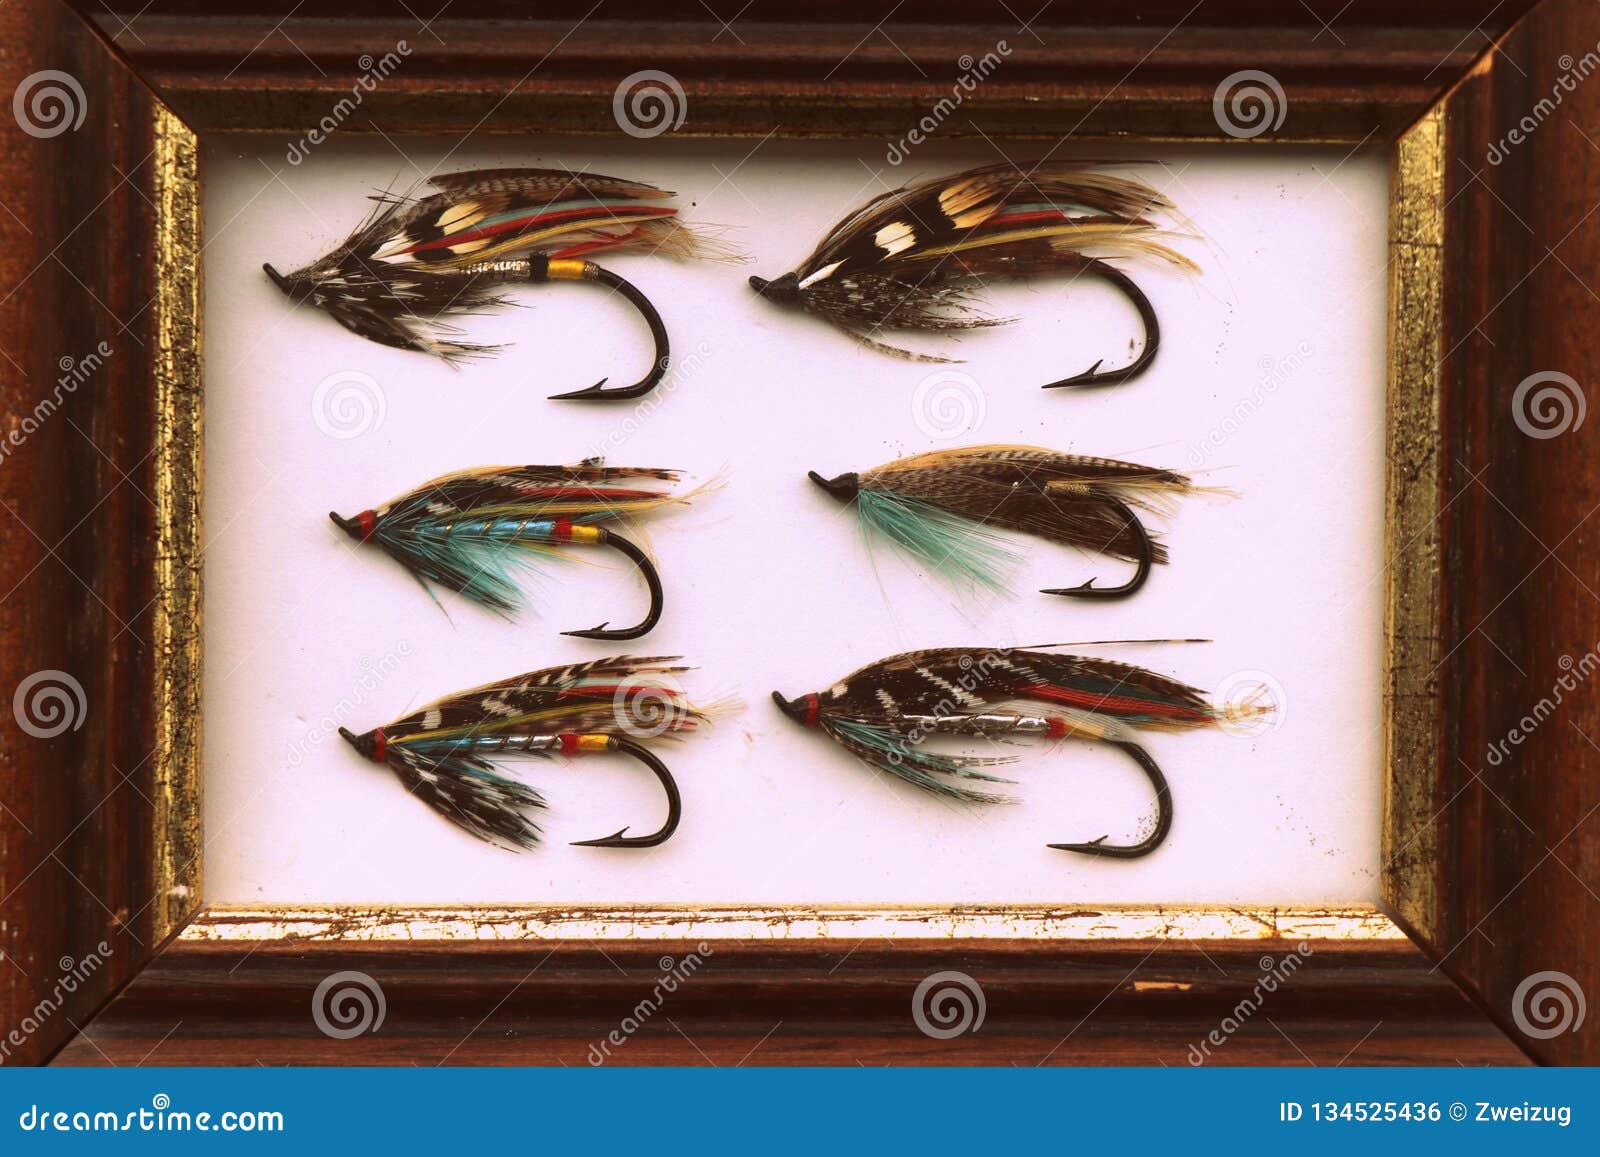 Vintage Classic Salmon Flies Fly Fishing Picture Stock Photo - Image of  baitcast, hardy: 134525436